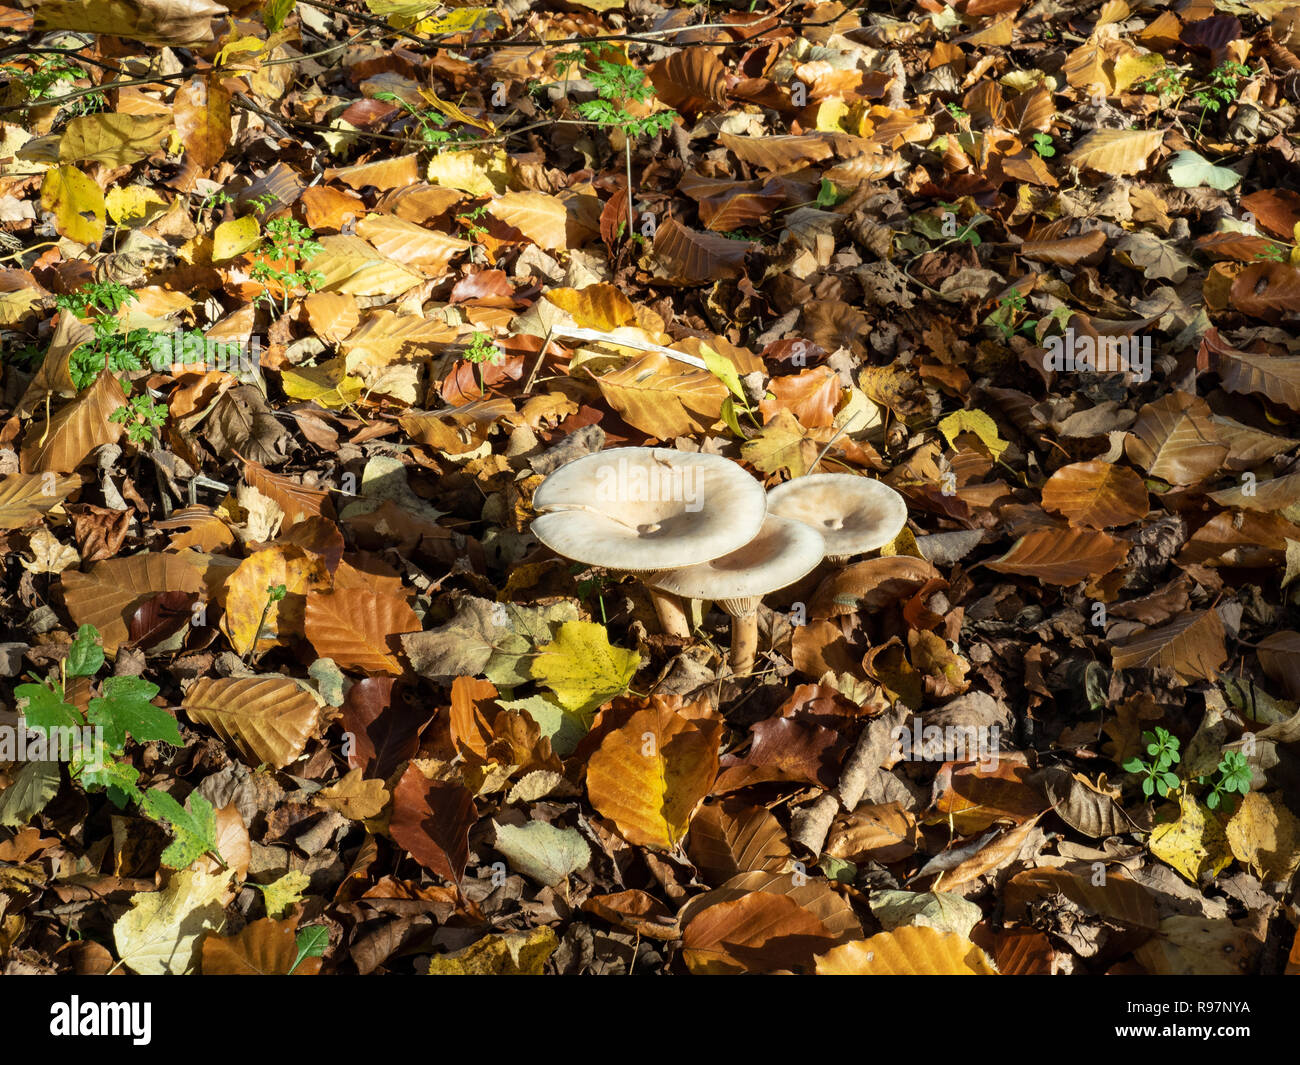 A group of three Common funnel mushrooms growing through fallen autumn leaves Stock Photo